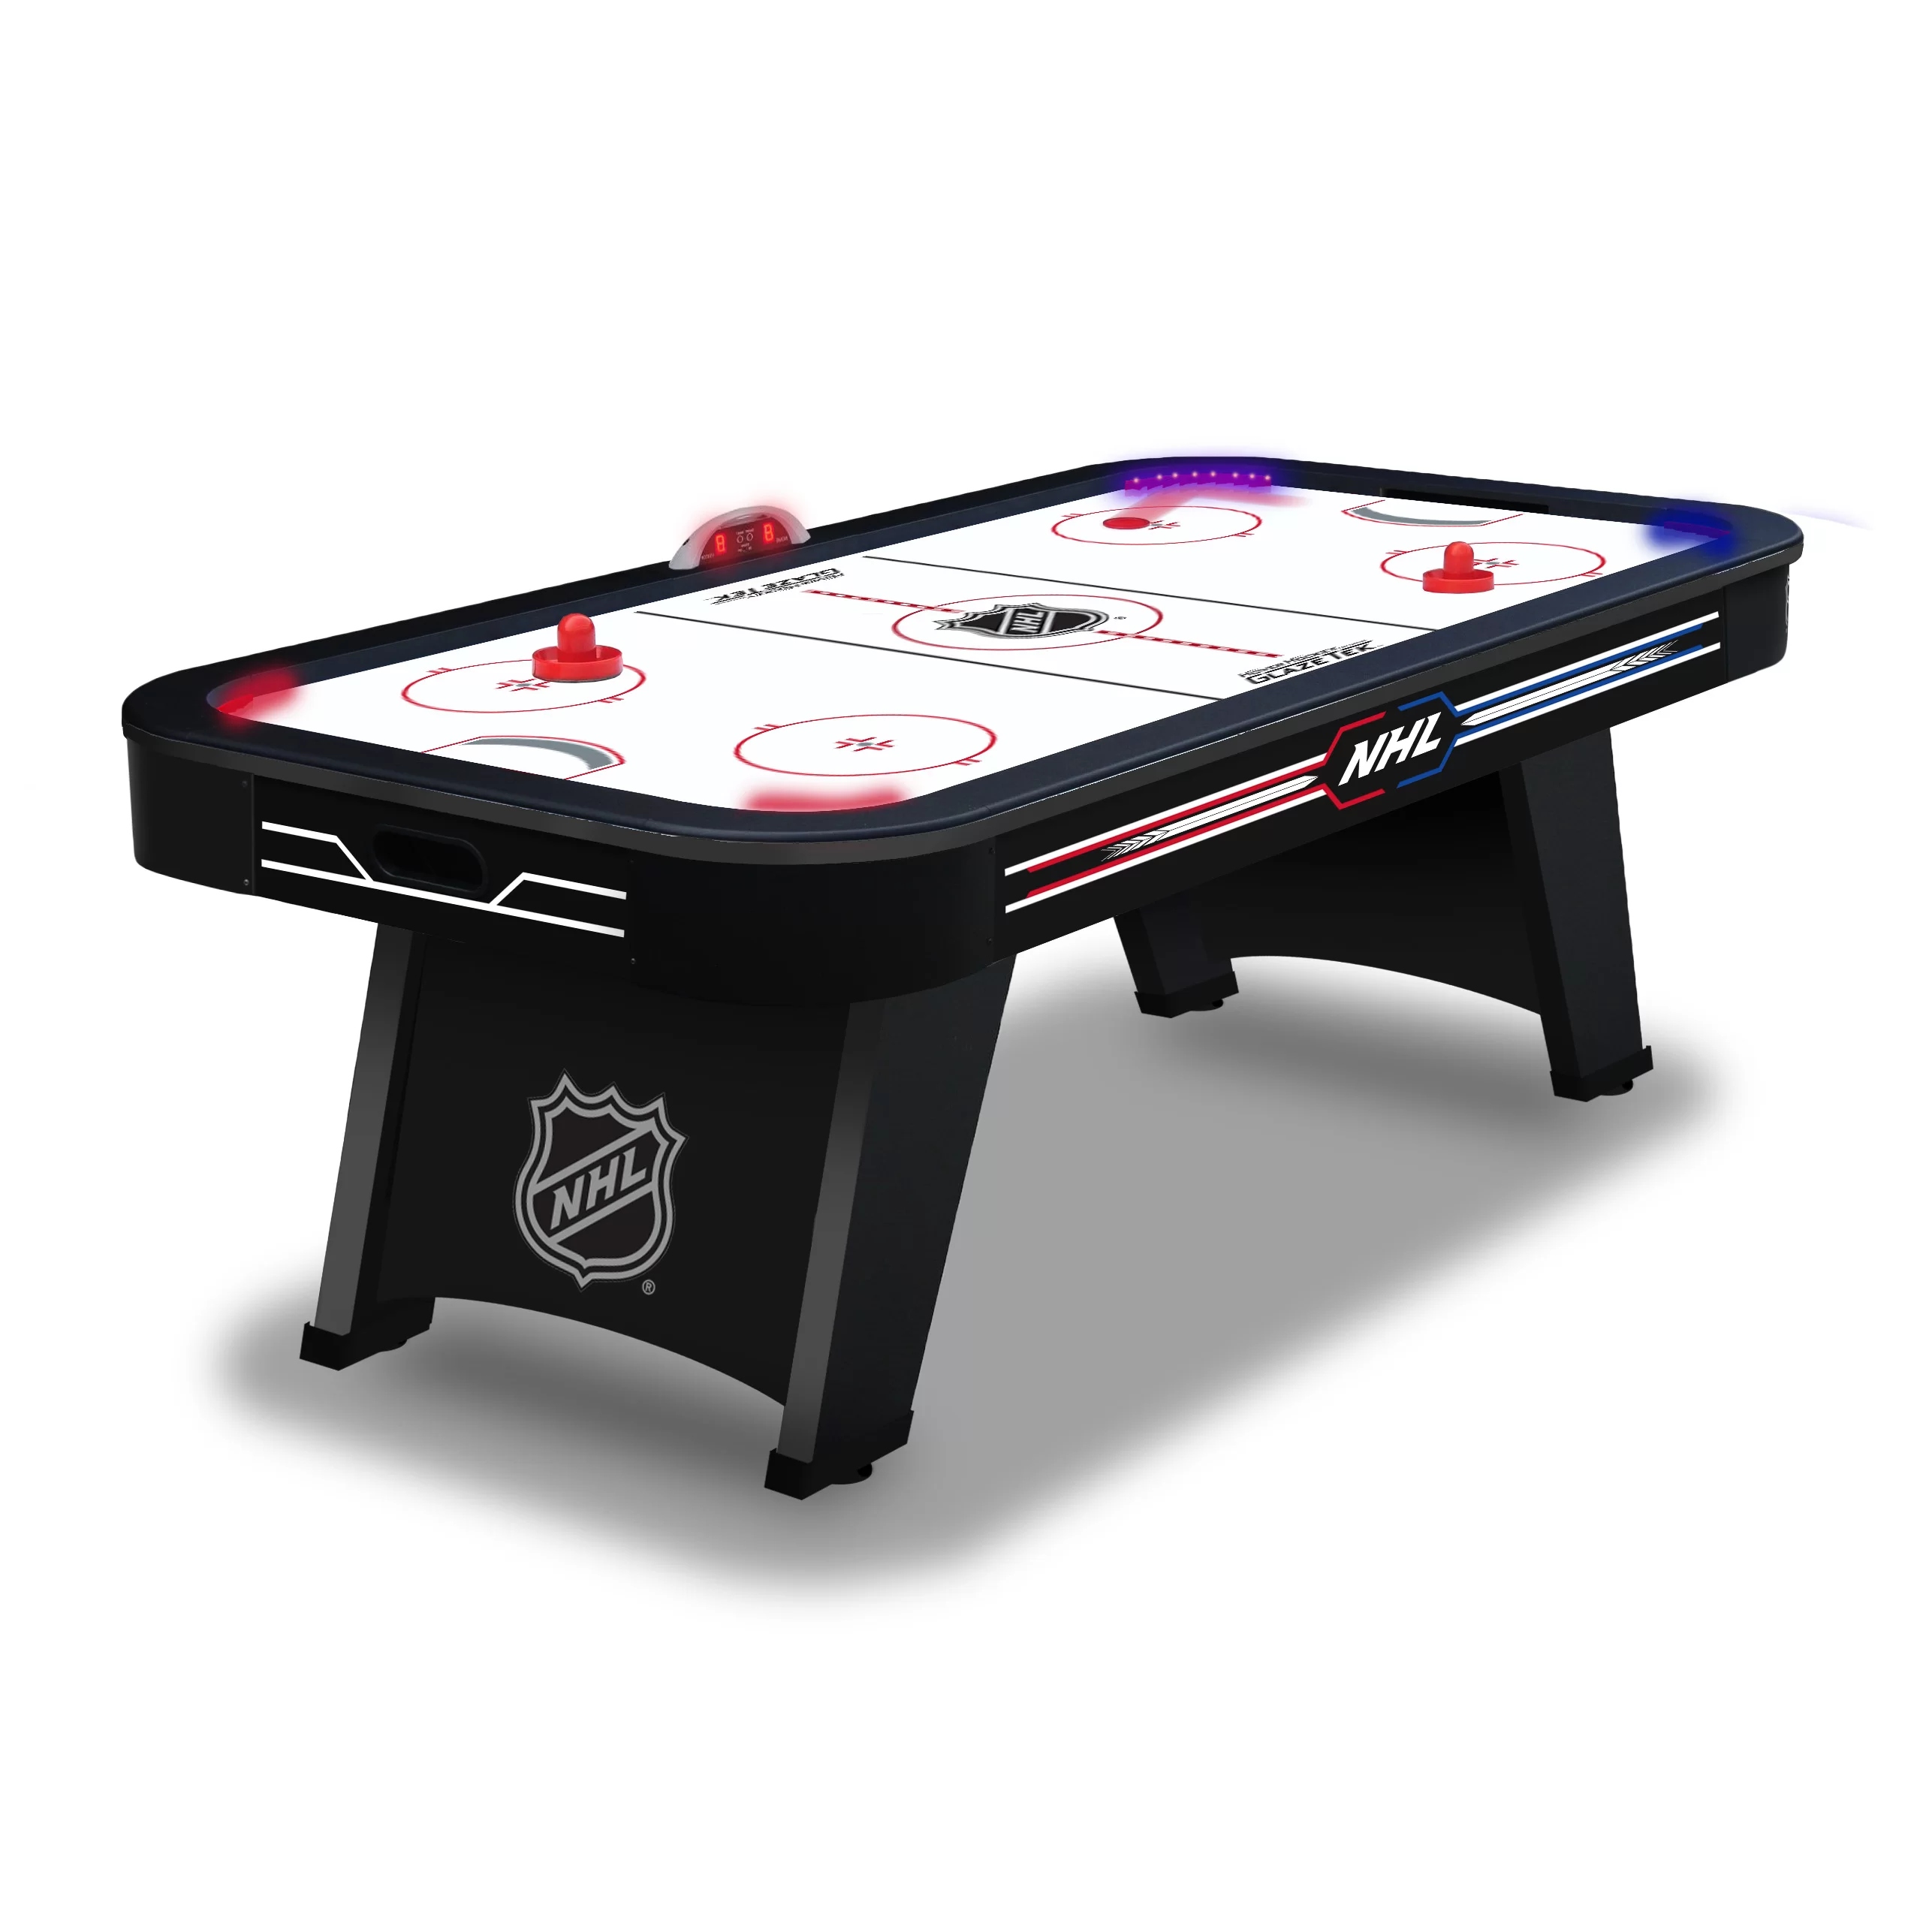 Air Hockey Table Deals - Finding The Best Bargains